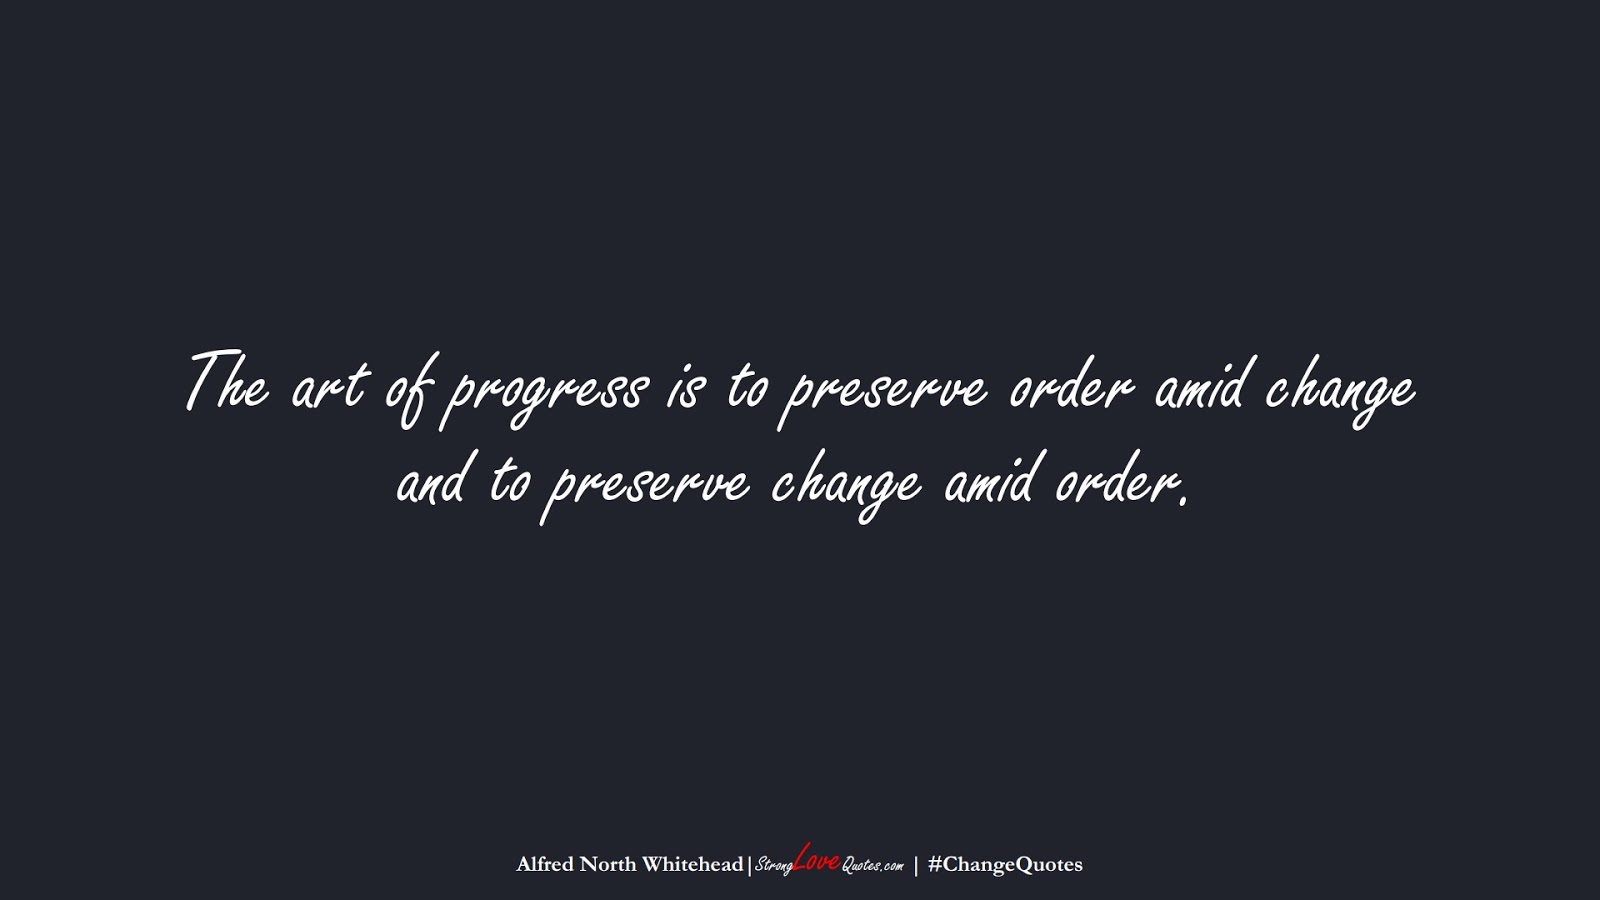 The art of progress is to preserve order amid change and to preserve change amid order. (Alfred North Whitehead);  #ChangeQuotes